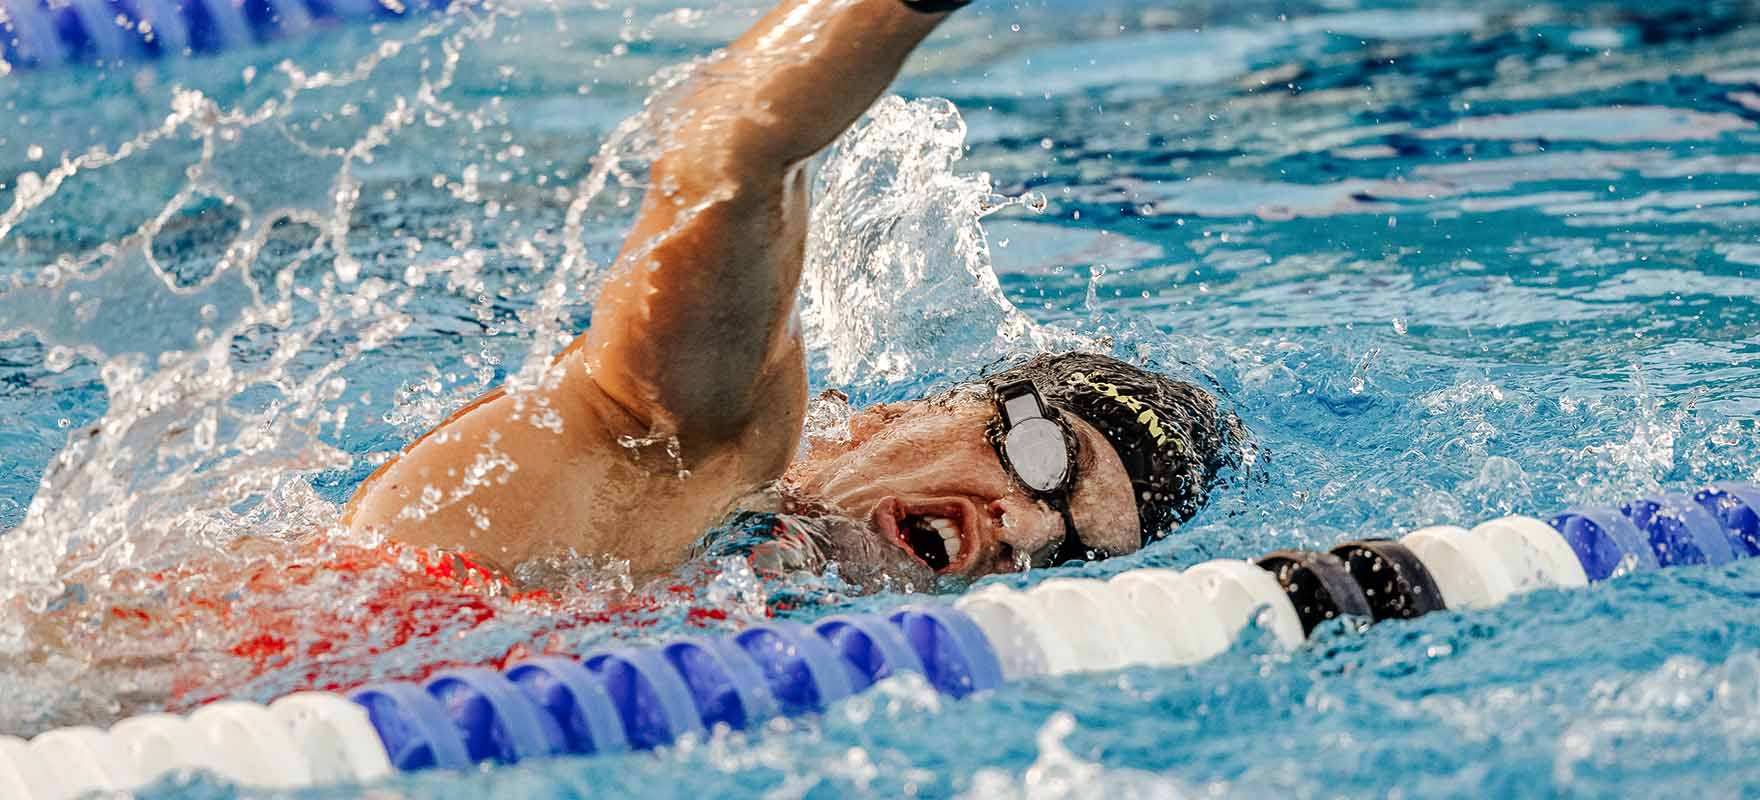 Put your swimming skills to work this summer